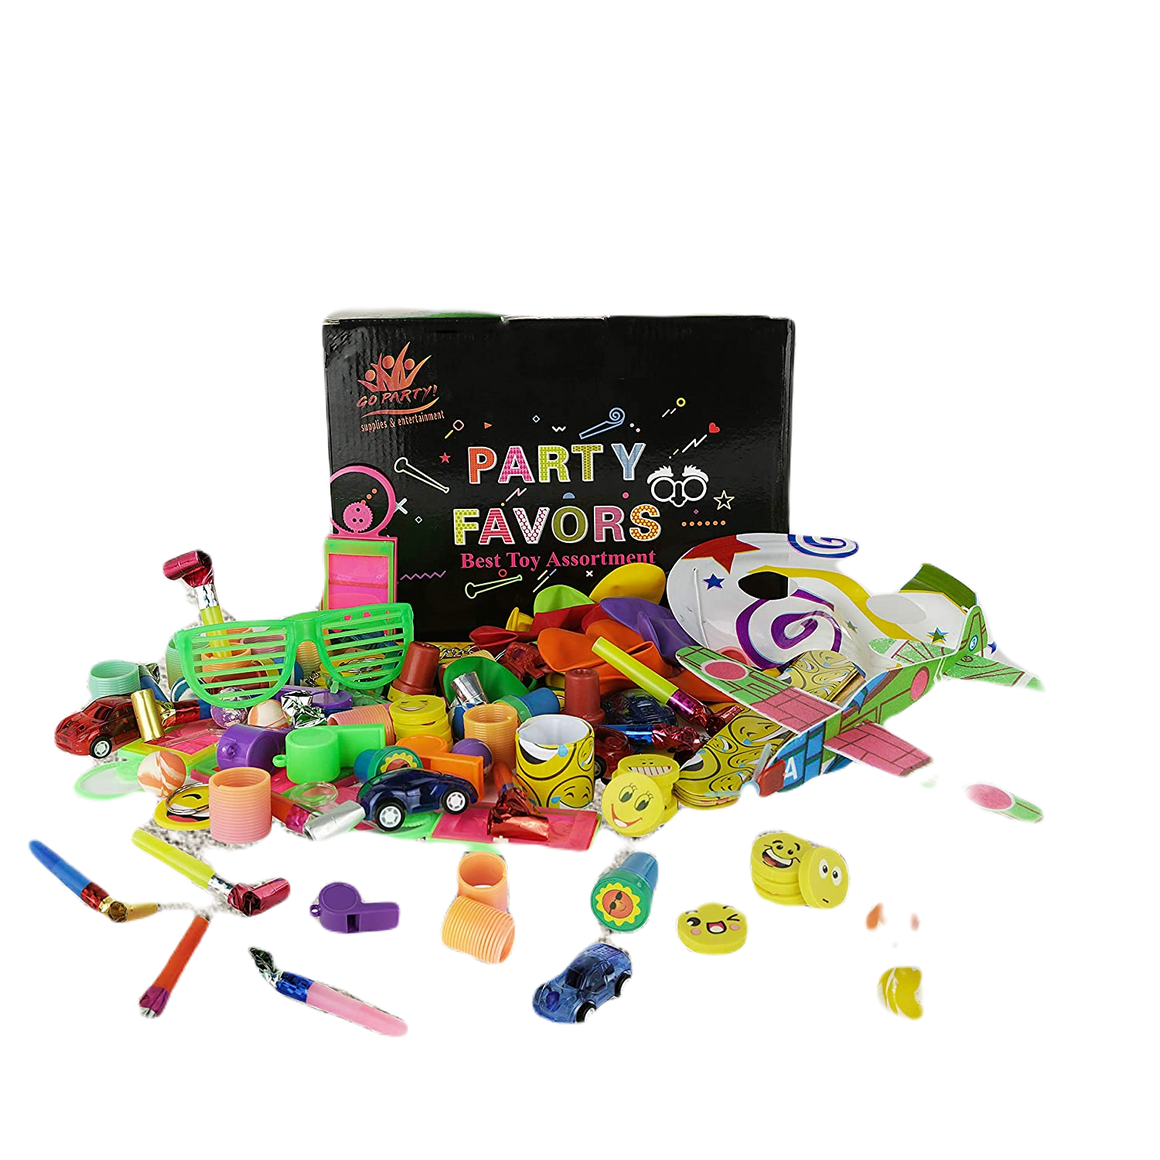 Party Favors for Kids Birthday Party- Bulk Novelty Toys for Girls and Boys - 150 Pc Party Prizes Toy Assortment for Goodie Bags Party Bags and Pinata Prizes